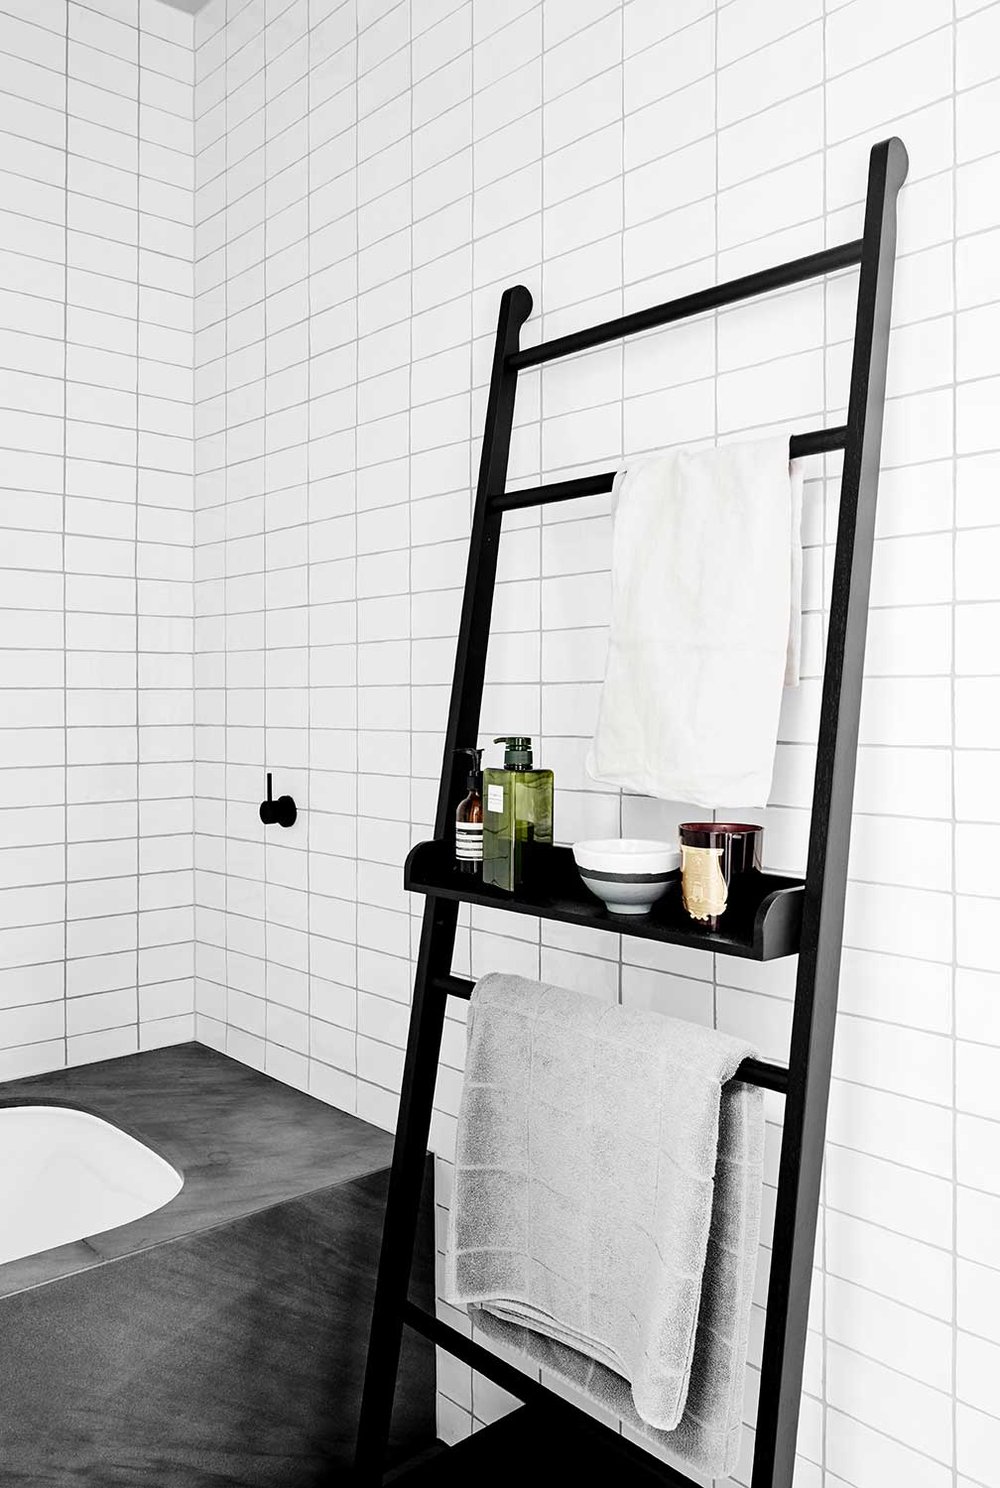 What are towel ladders?